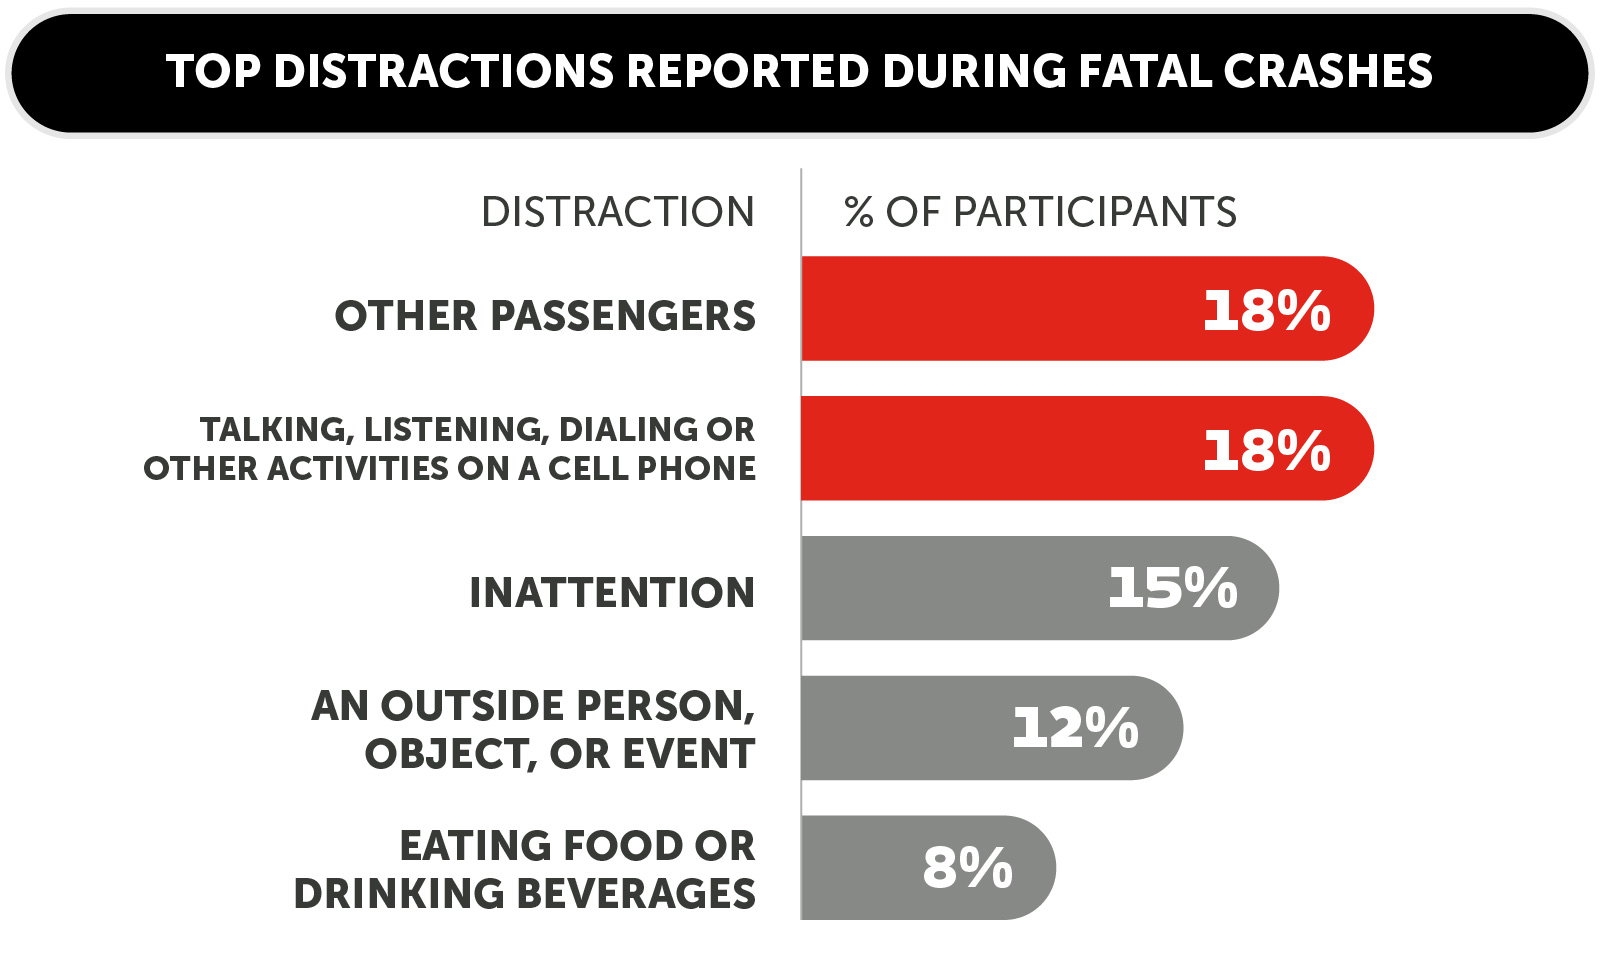 Data graph that shows the top distractions reported during fatal distracted driving crashes.jpg detail image